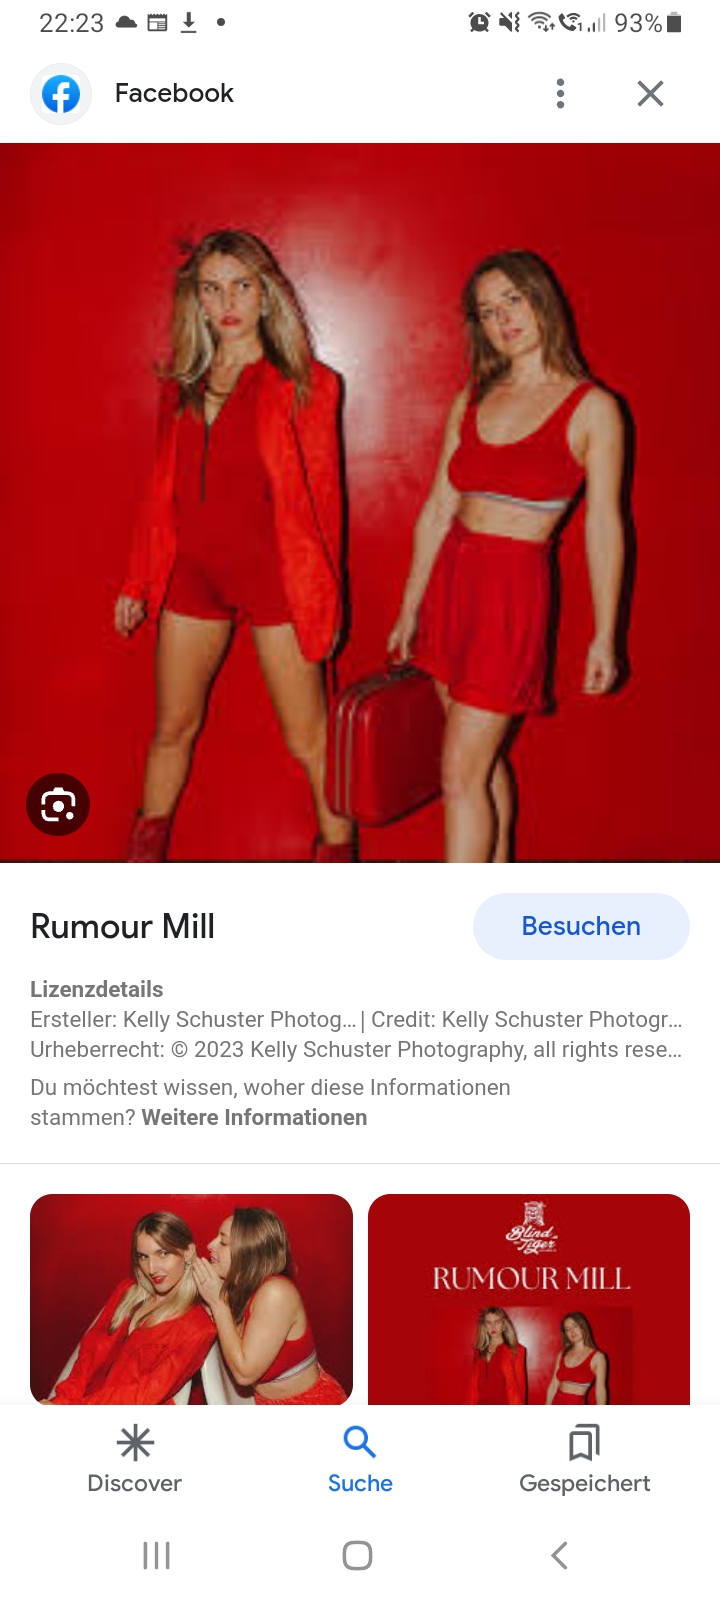 Rumour Mill concert am 16.11. In der Mühle save the date